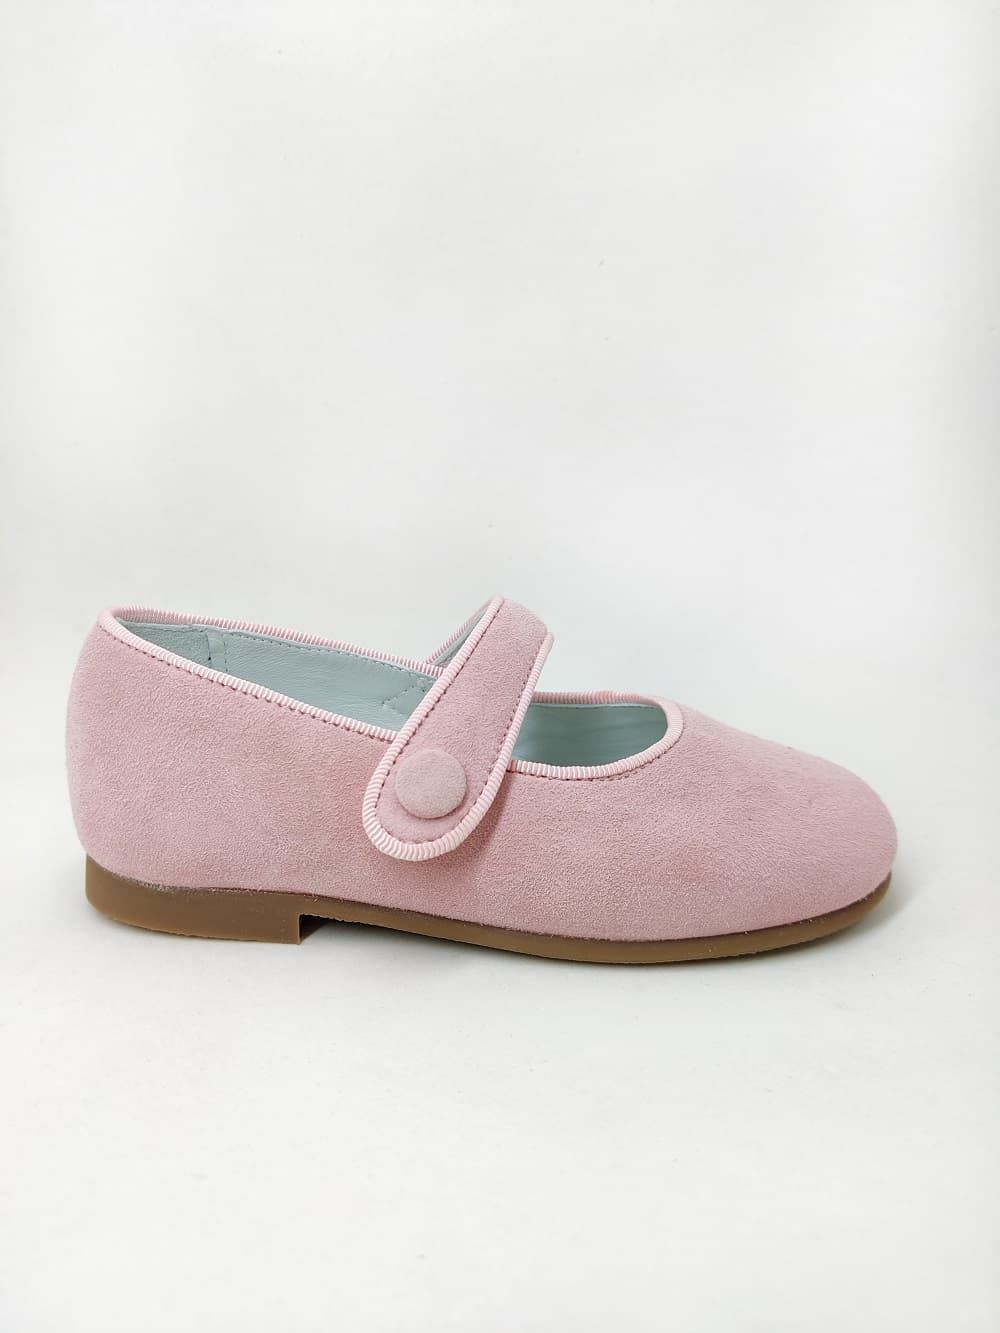 Pirufin (Piruflex) Mary Janes for baby girls in Pink suede - Image 2